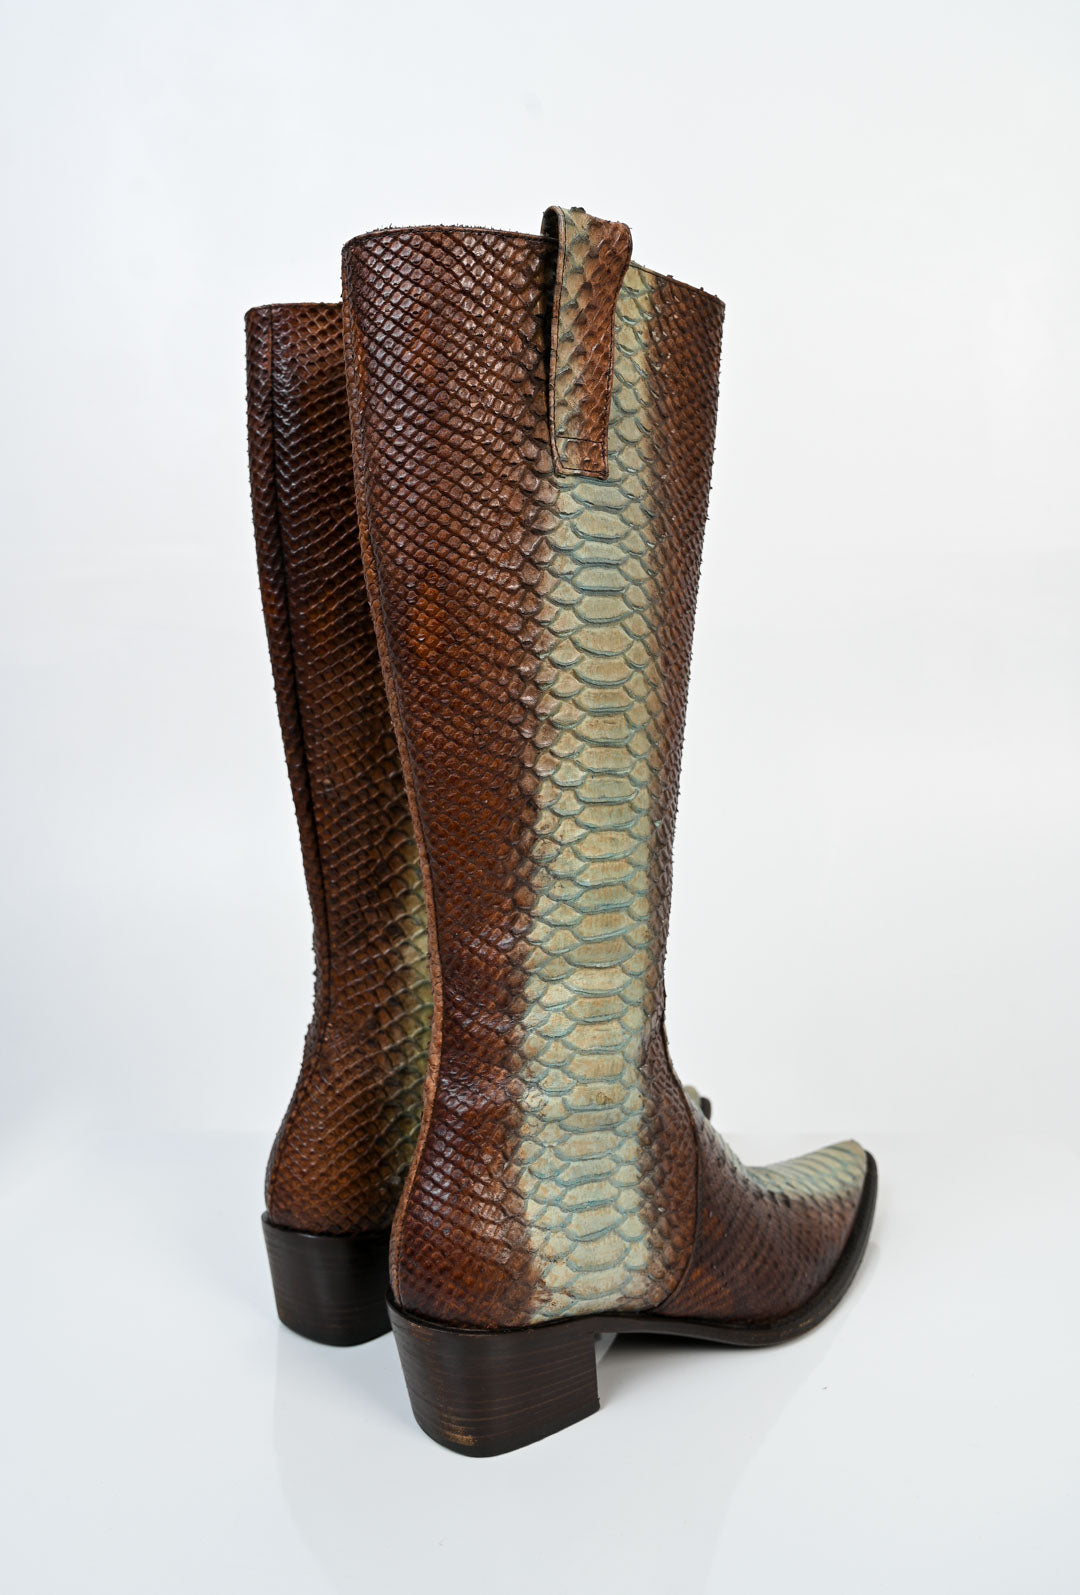 Mint Chocolate Ombre Snakeskin Boots (39)